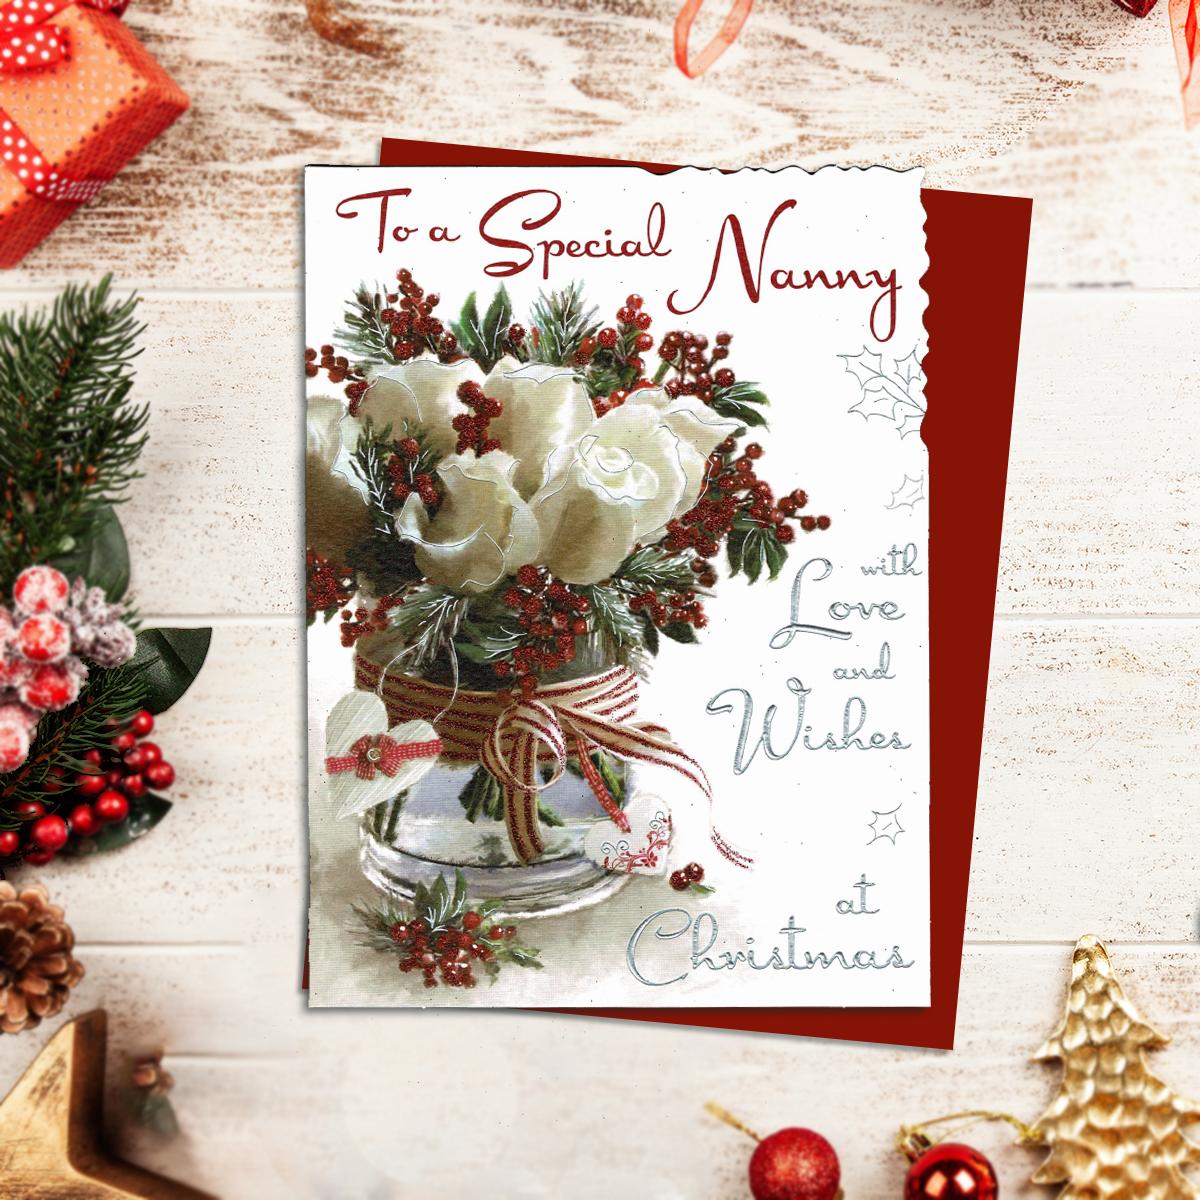 Special Nanny Christmas Card Alongside Its Red Envelope